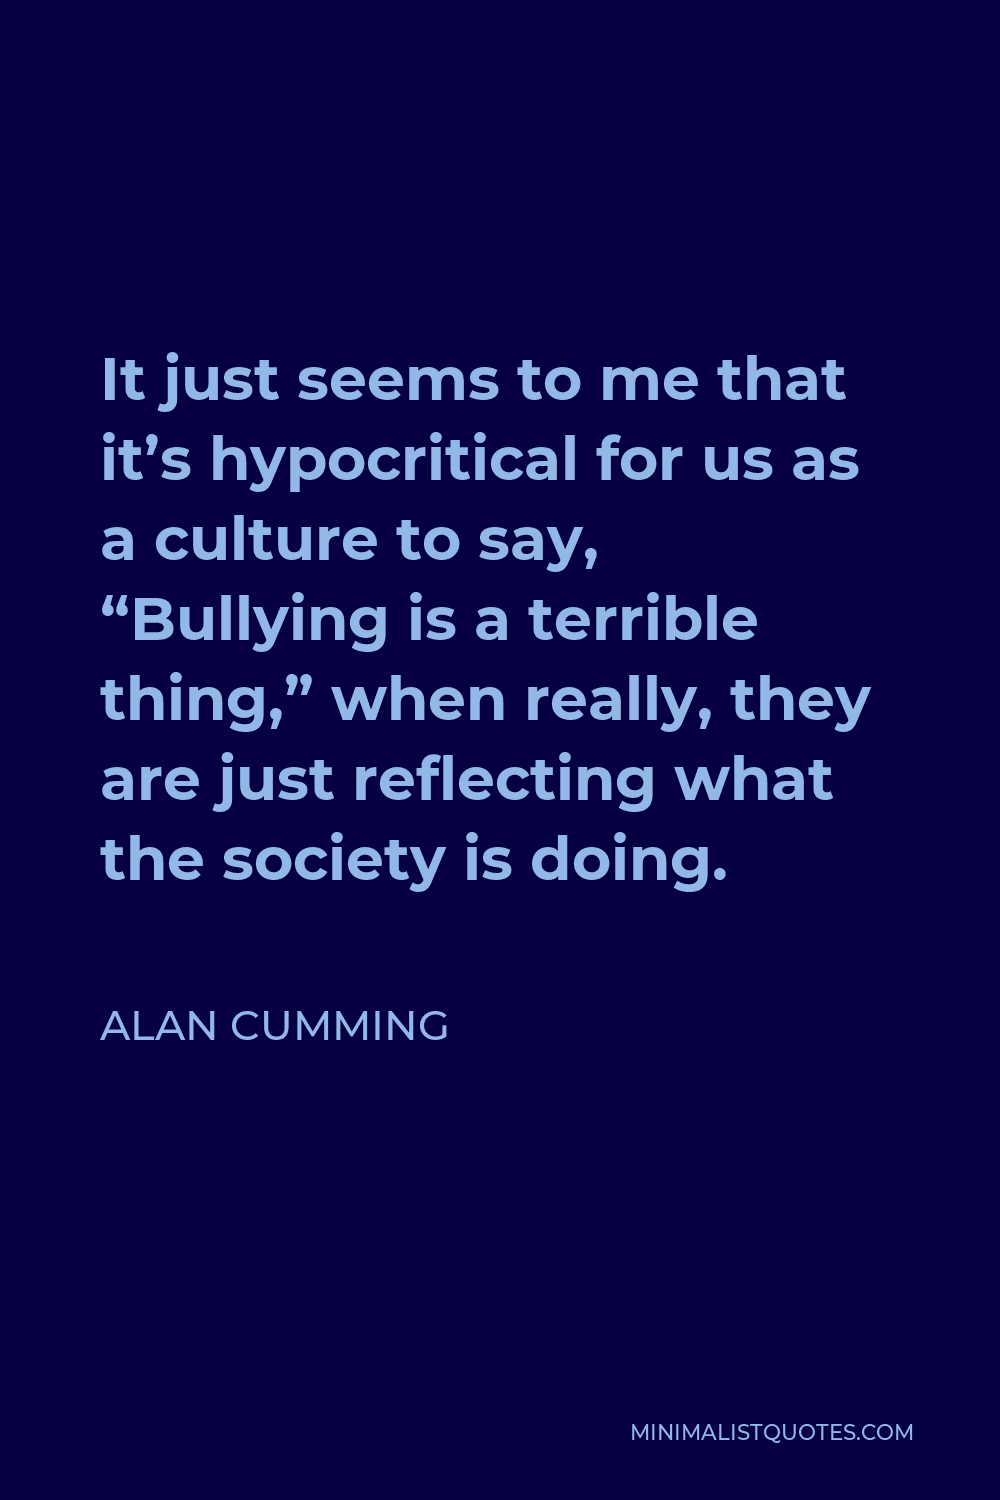 Alan Cumming Quote - It just seems to me that it’s hypocritical for us as a culture to say, “Bullying is a terrible thing,” when really, they are just reflecting what the society is doing.